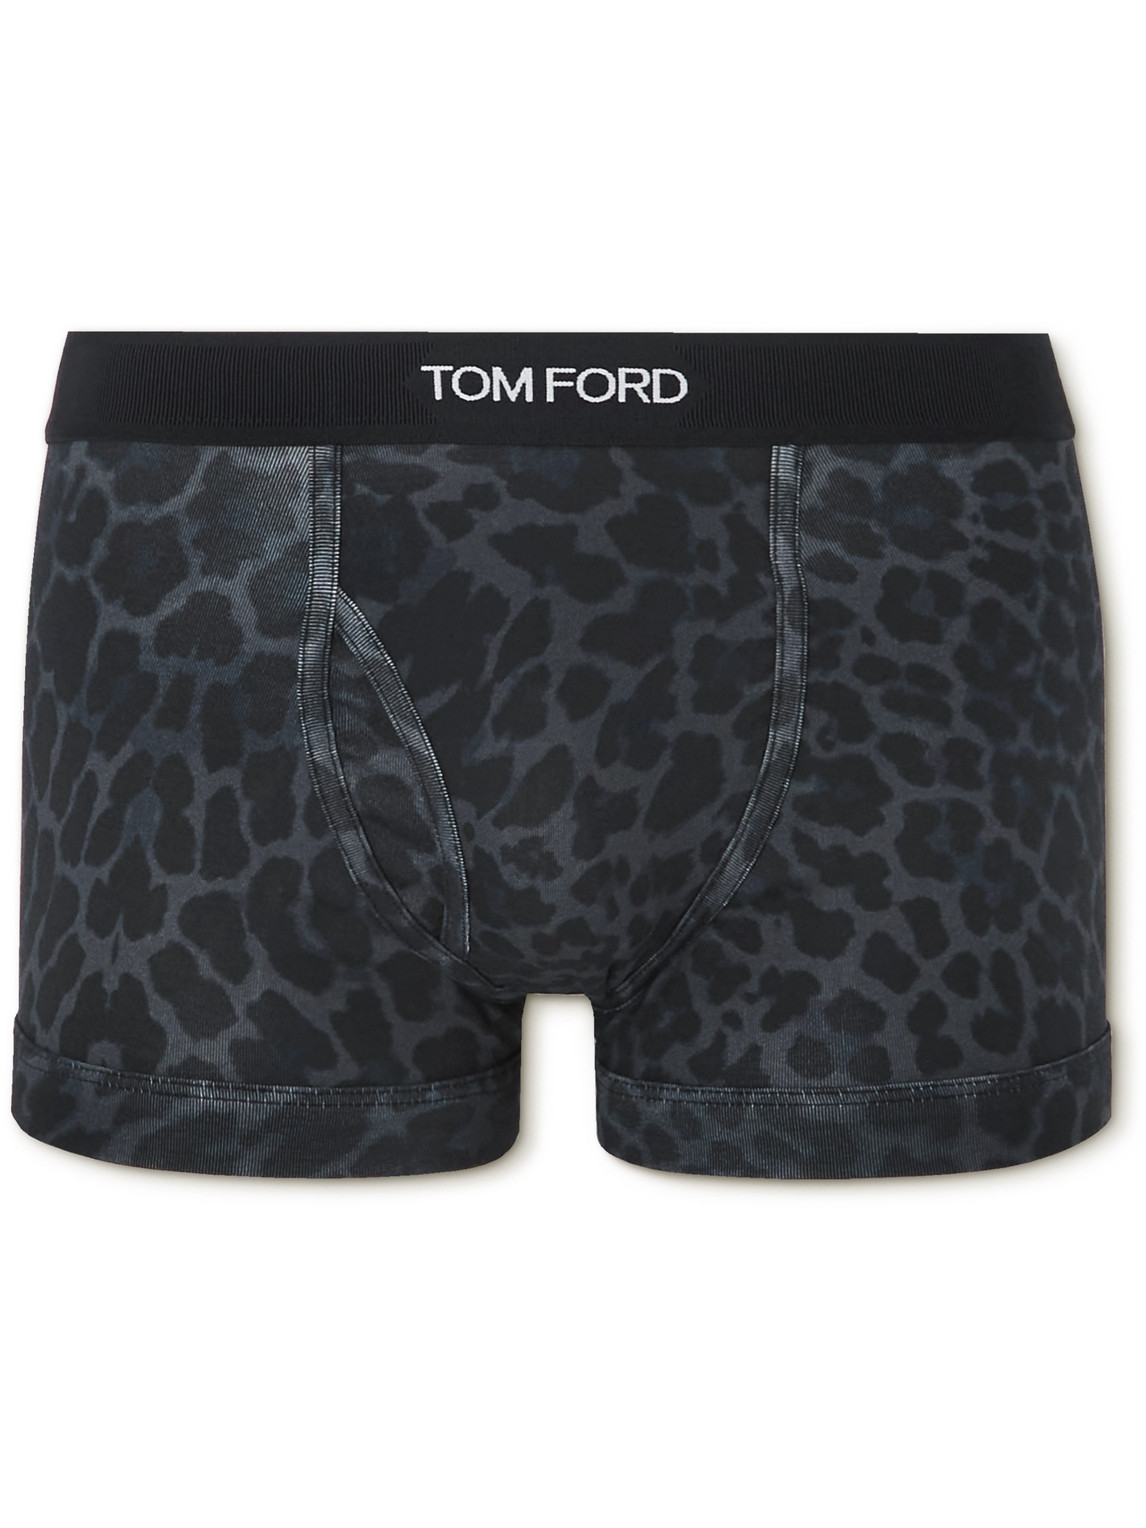 TOM FORD LEOPARD-PRINT STRETCH-COTTON BOXERS BRIEFS